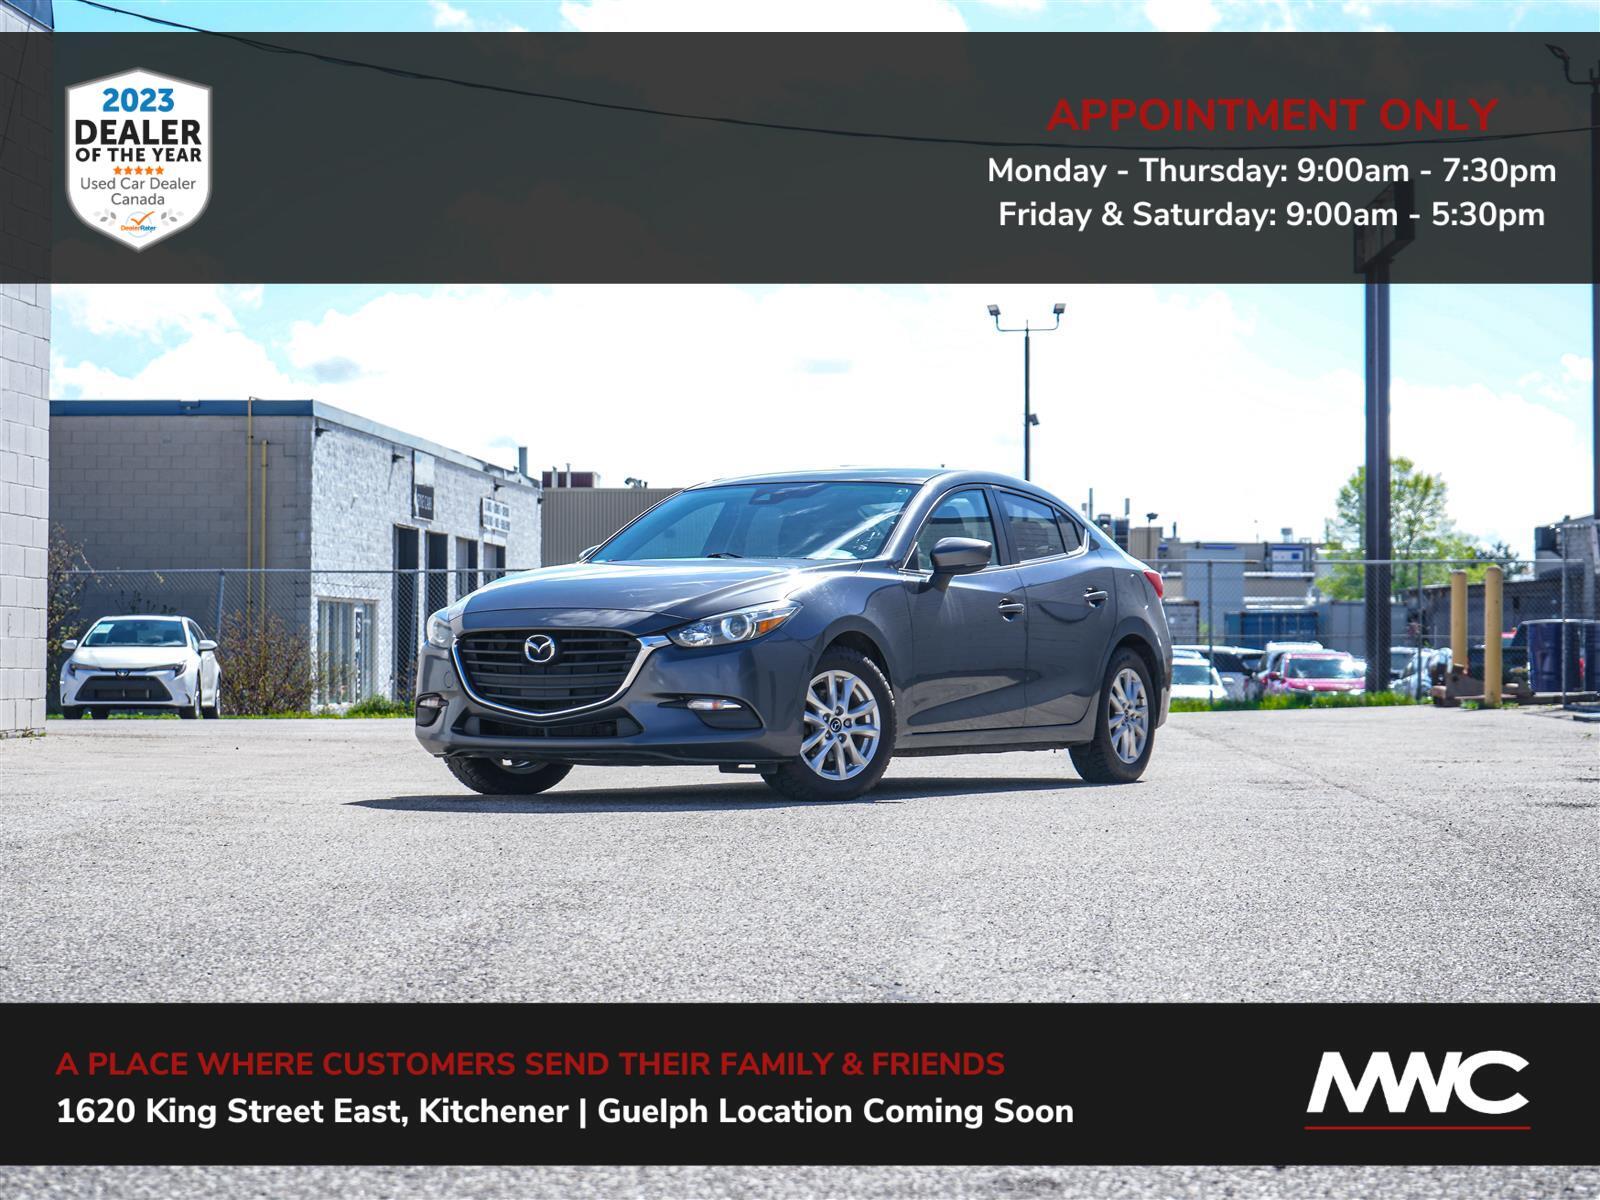 2017 Mazda Mazda3 GS | 17 IN GUELPH, BY APPT. ONLY